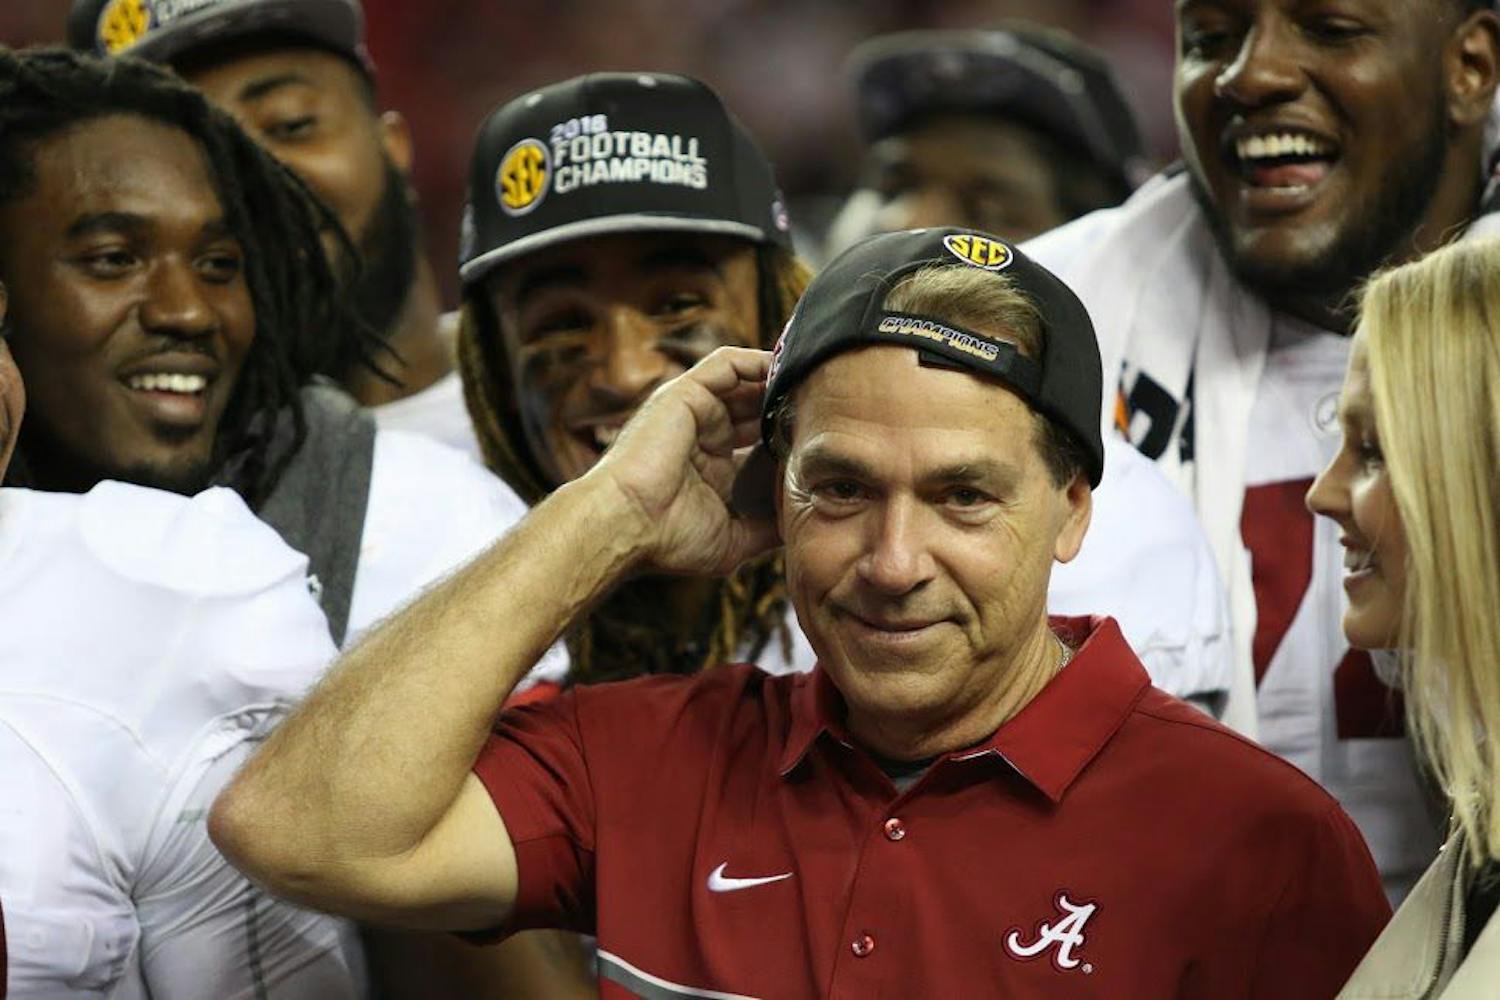 Nick Saban celebrates after winning the SEC Championship on Saturday, Dec. 3, in the Georgia Dome.&nbsp;